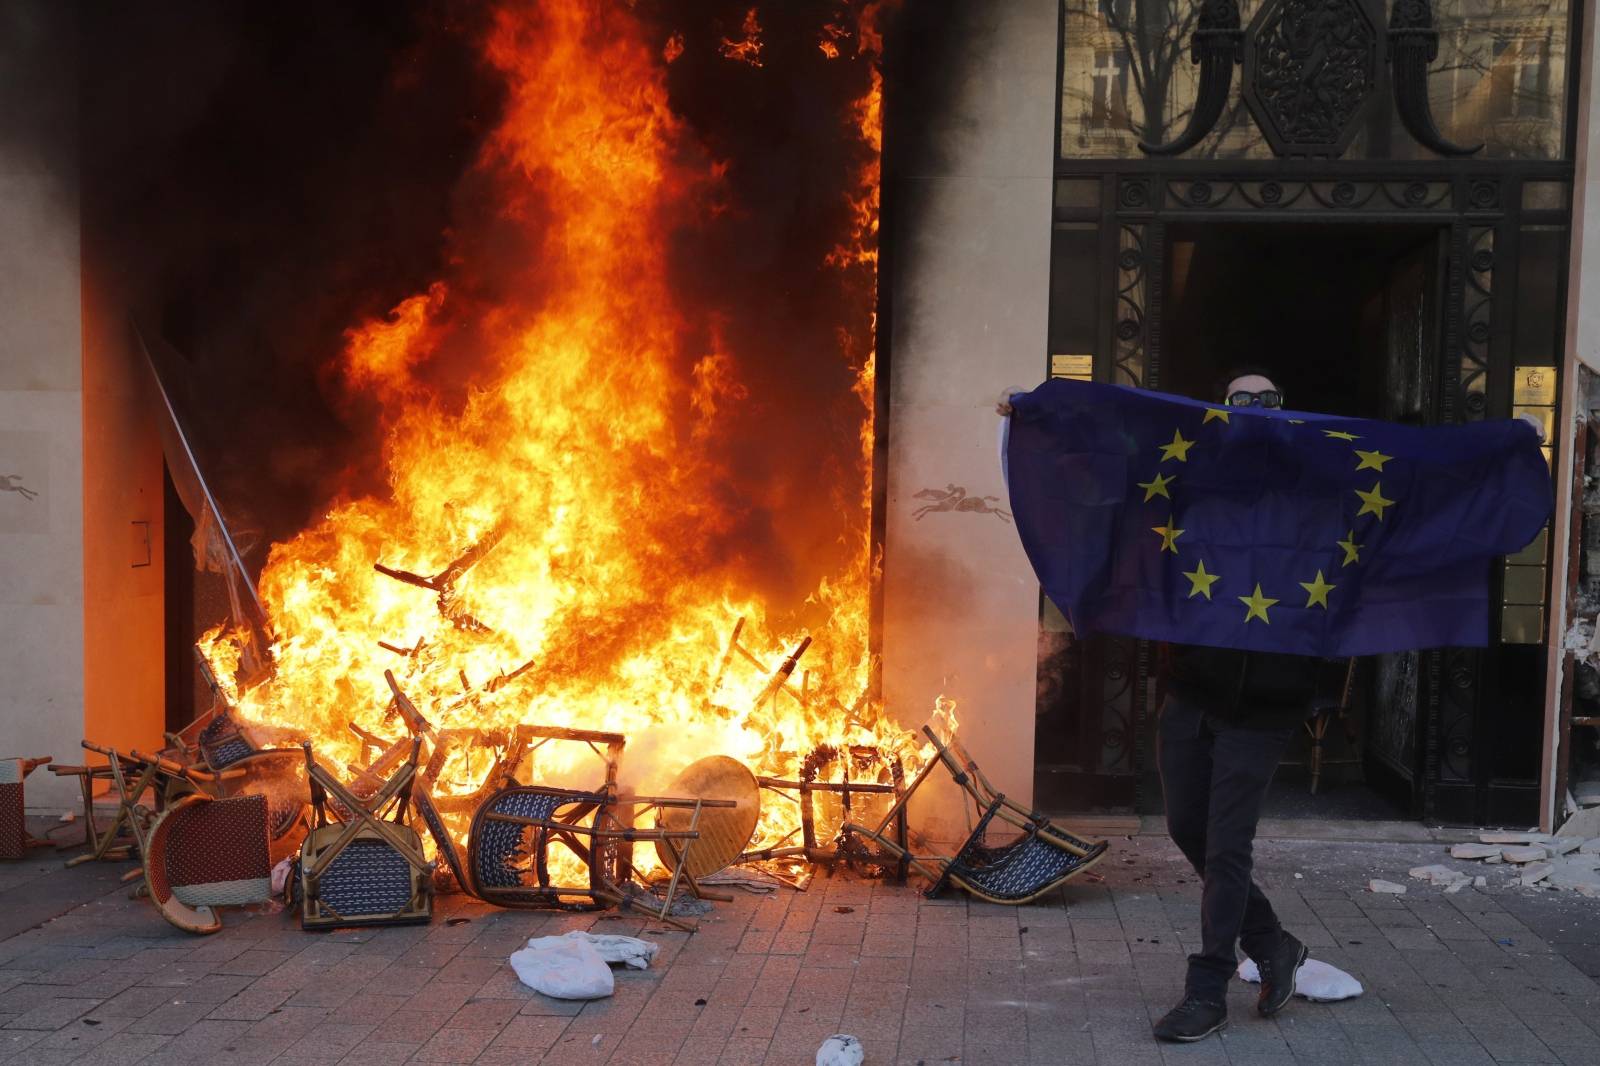 A demonstrator holds European flag near burning shop during demonstration by "yellow vests" in Paris